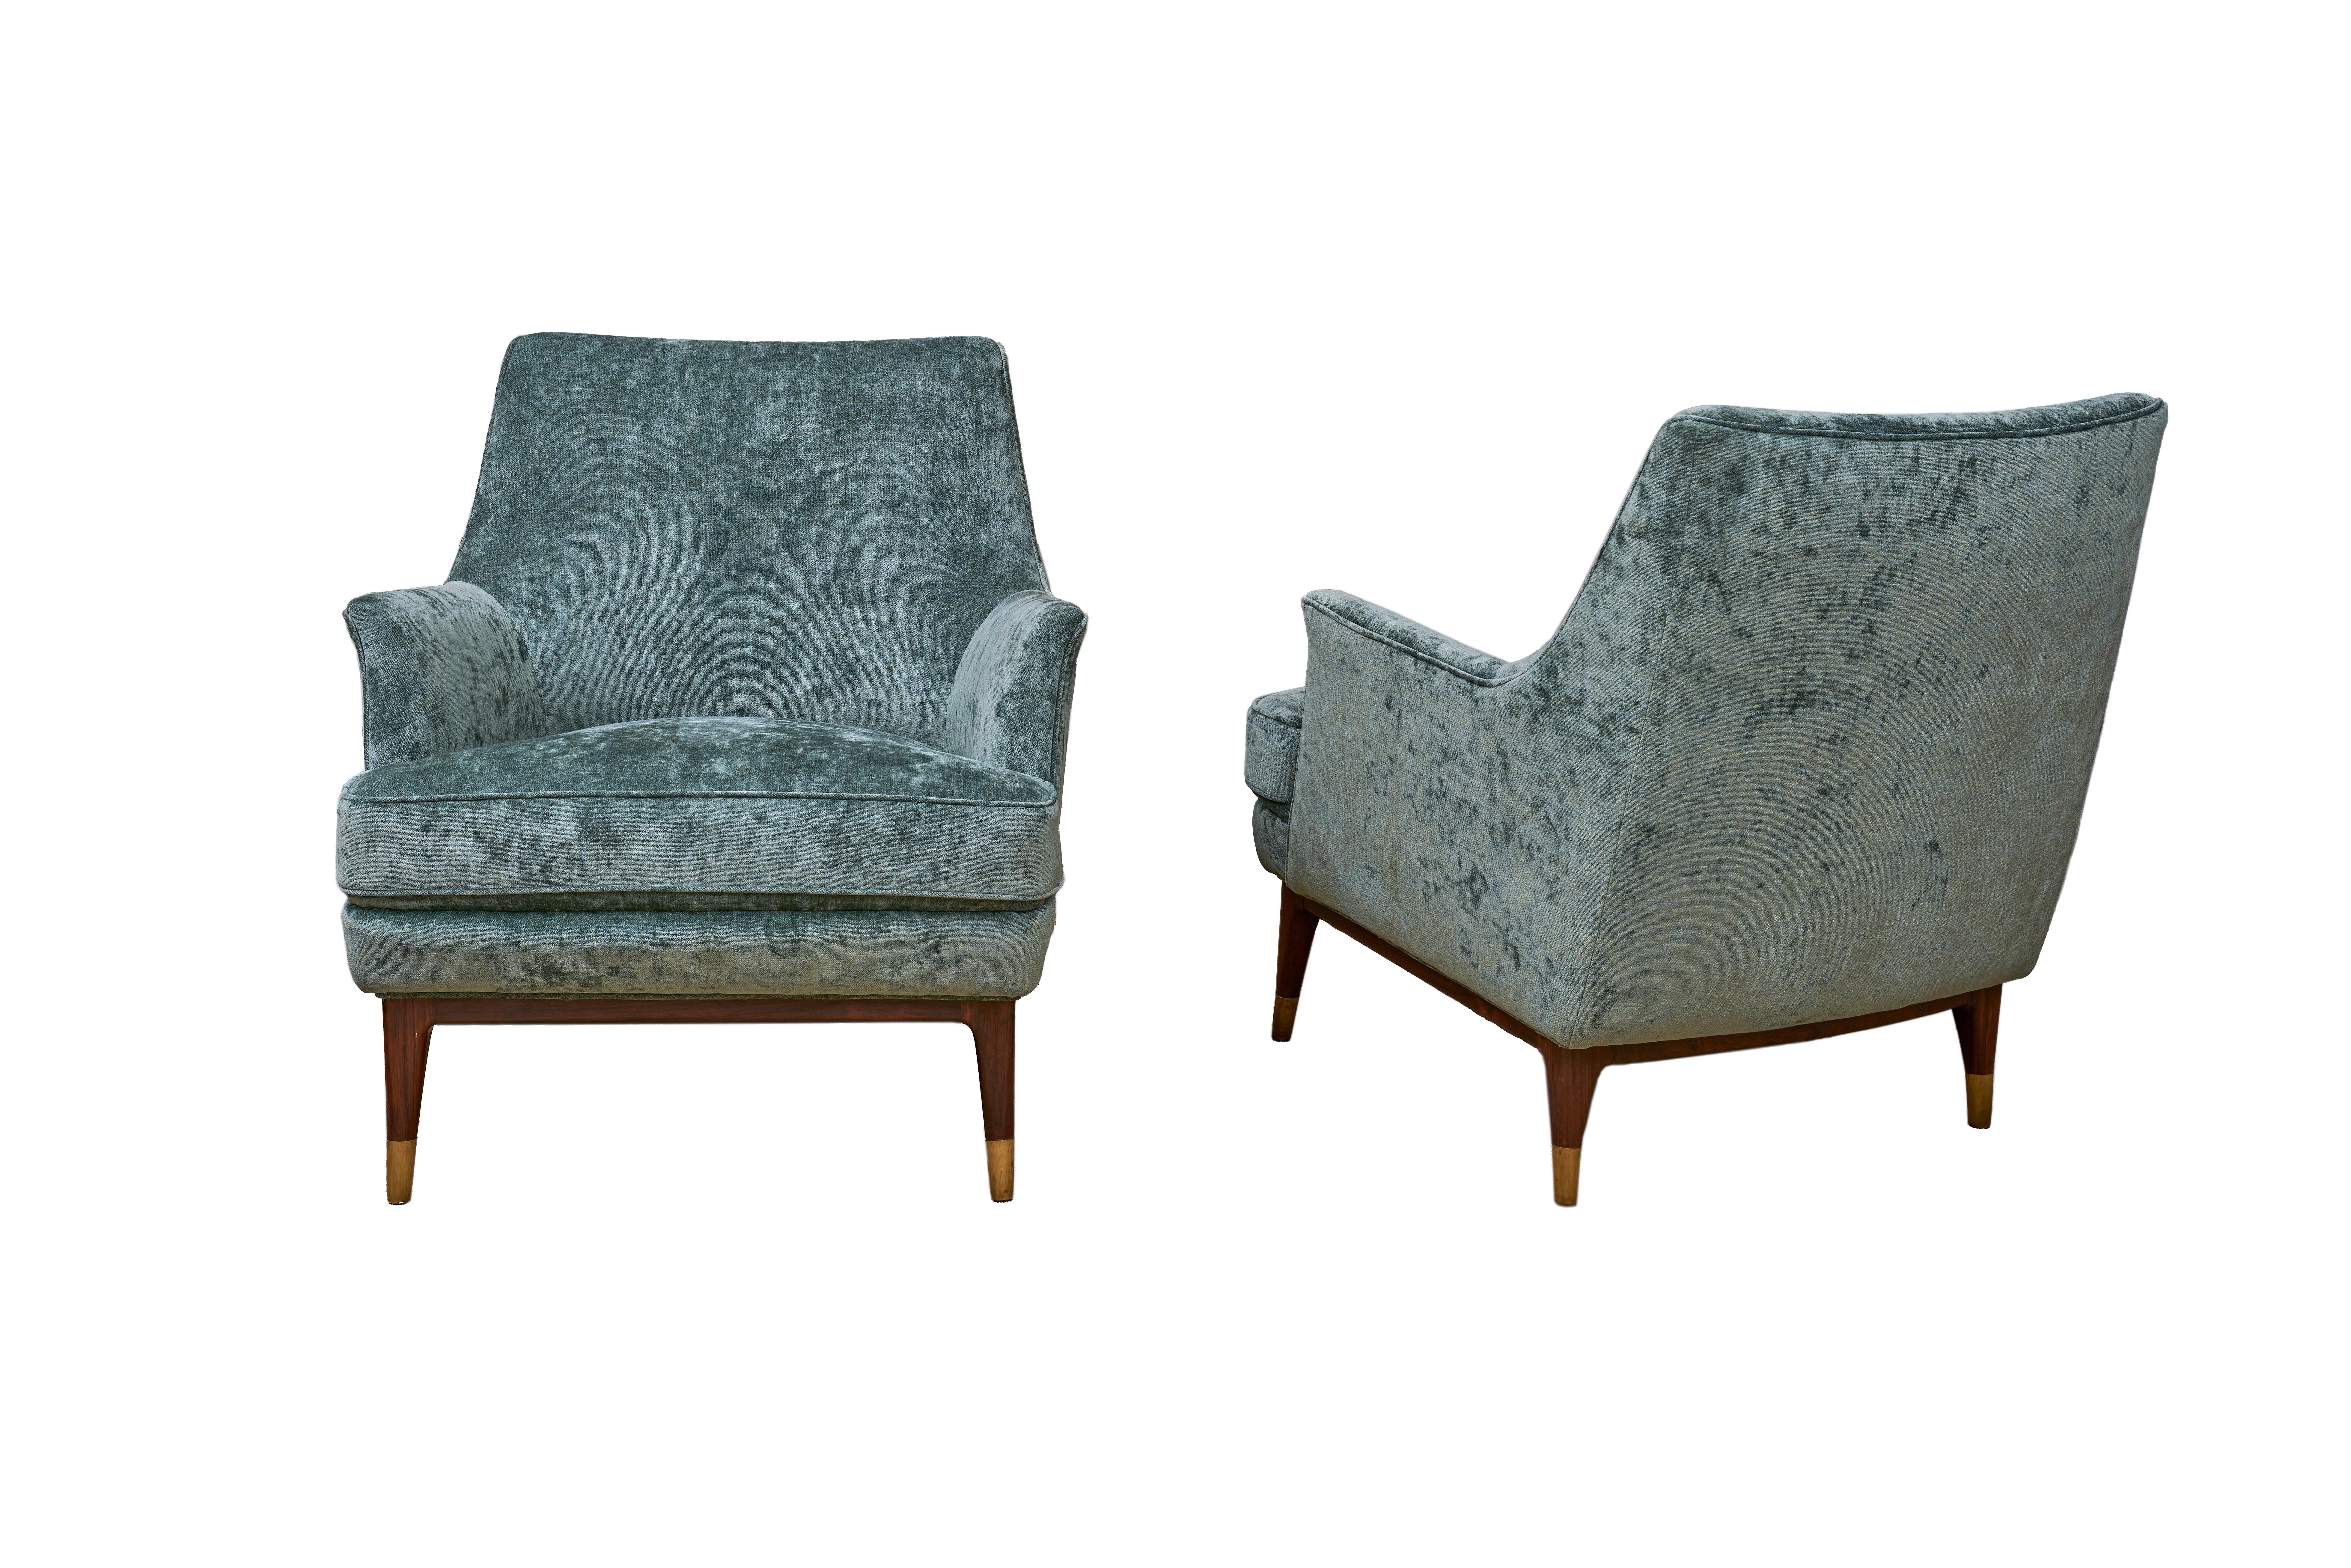 A stunning pair of lounge chairs by Lysberg, Hansen & Therp, crafted in the 1940s and newly upholstered in a Colefax & Fowler teal velvet. The set is settled on Rosewood legs with exquisite brass detailing. A quite comfortable pair of chairs!